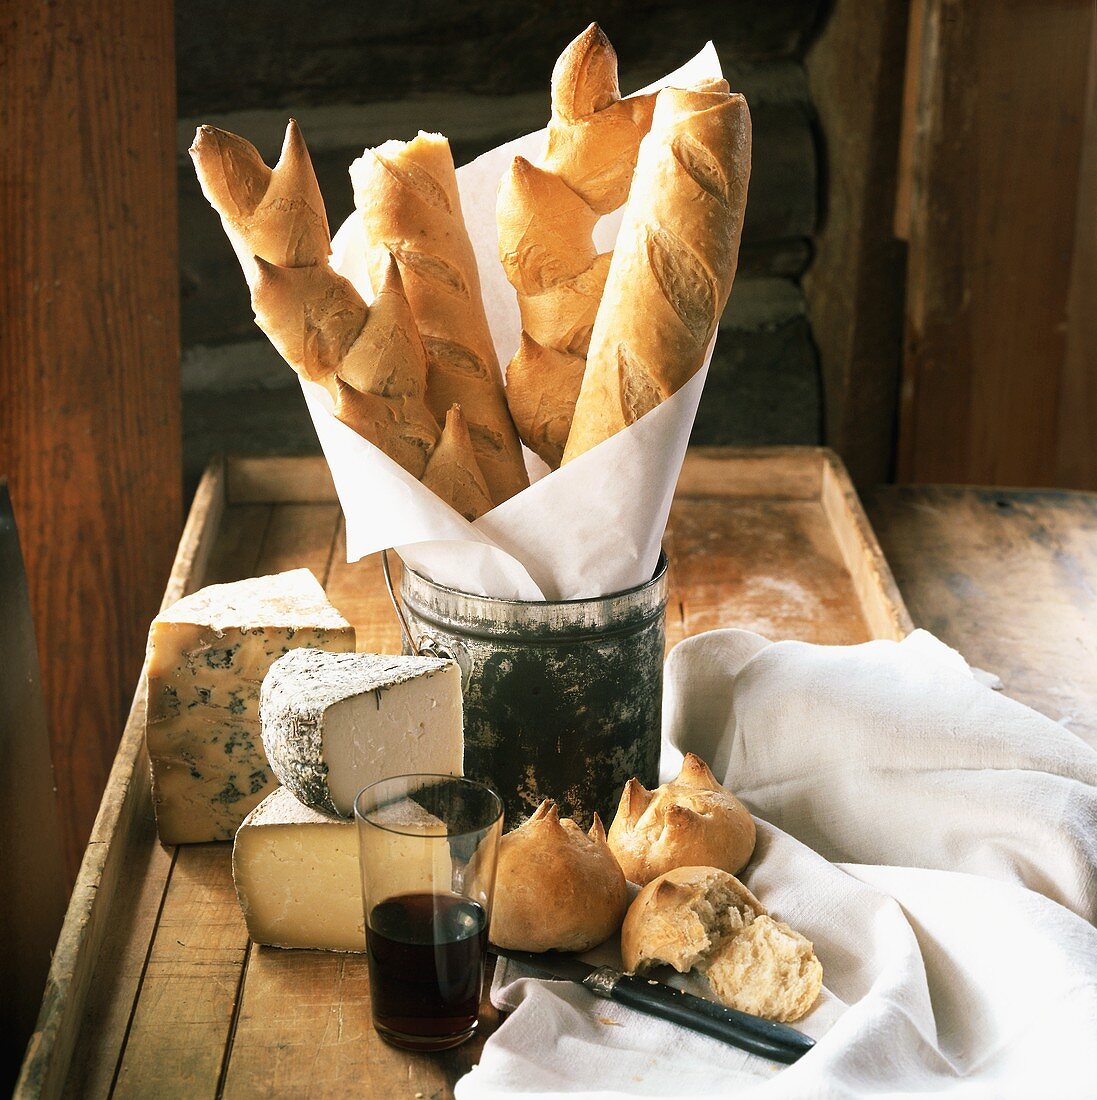 Rustic still life with cheese, bread and red wine